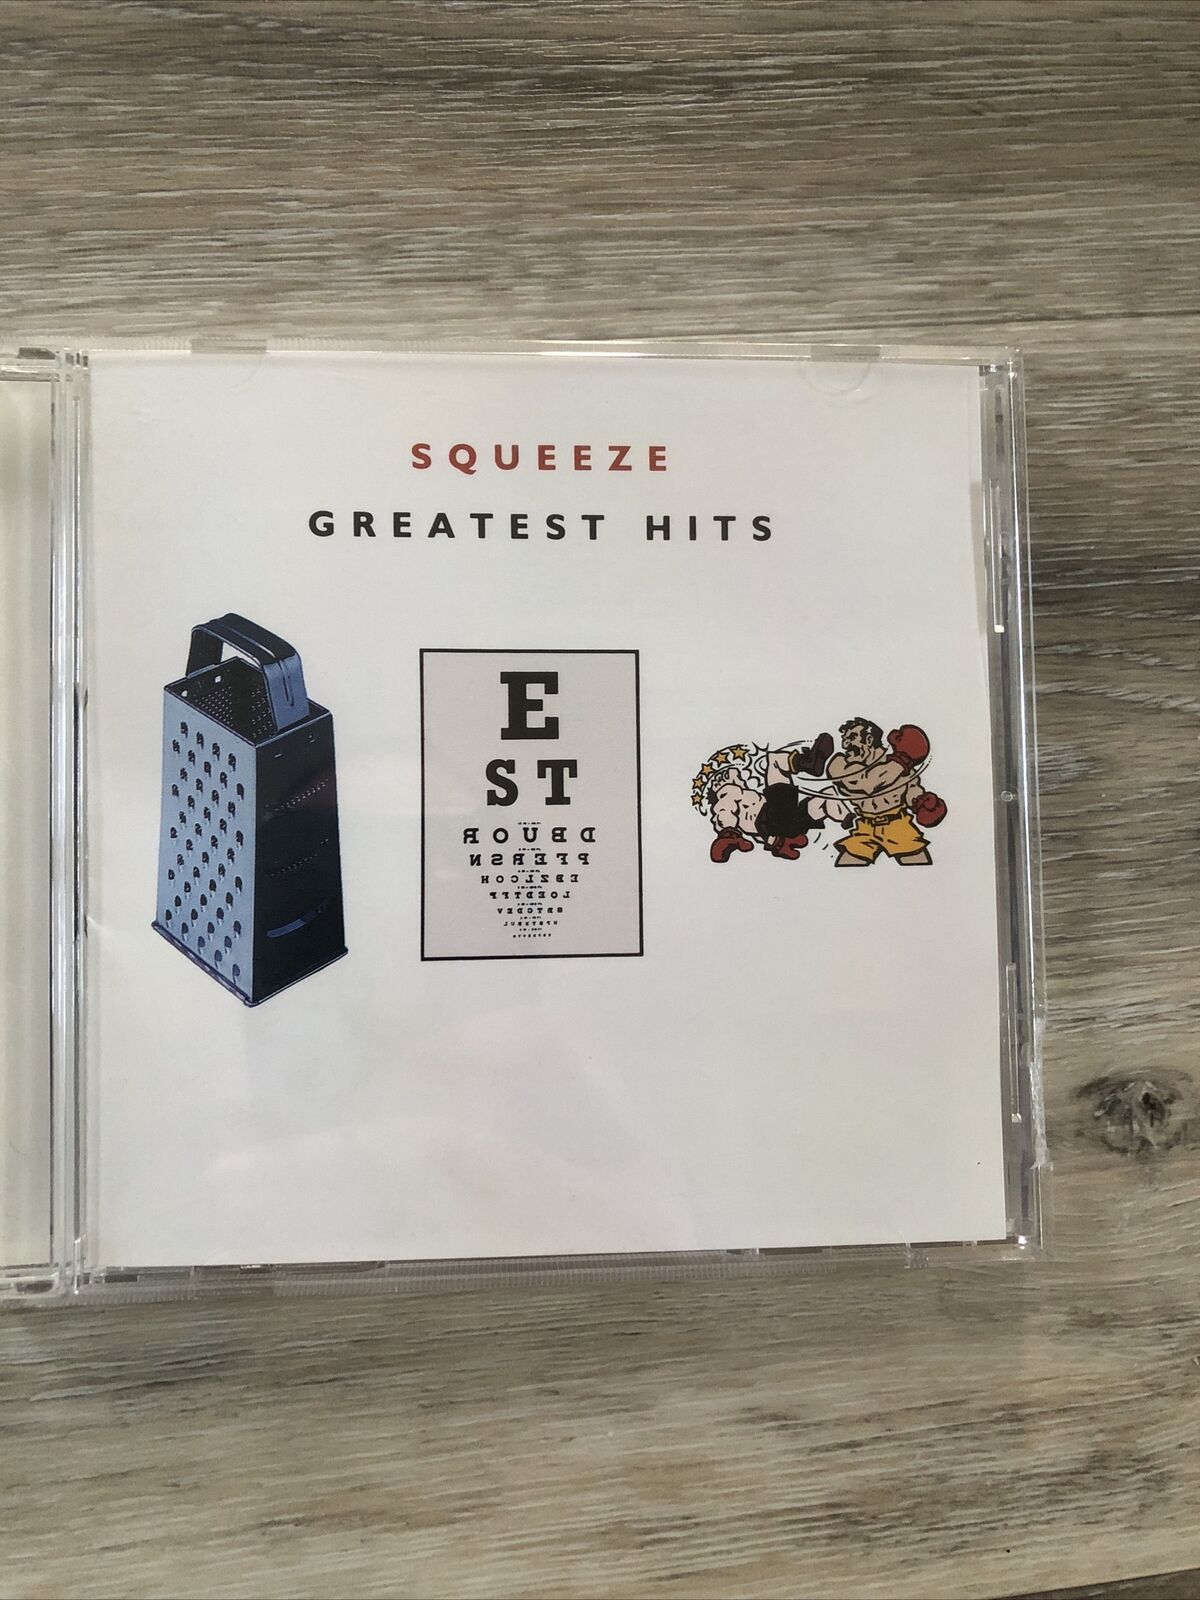 Greatest Hits by Squeeze - New Wave Alternative Rock - Music Audio cd